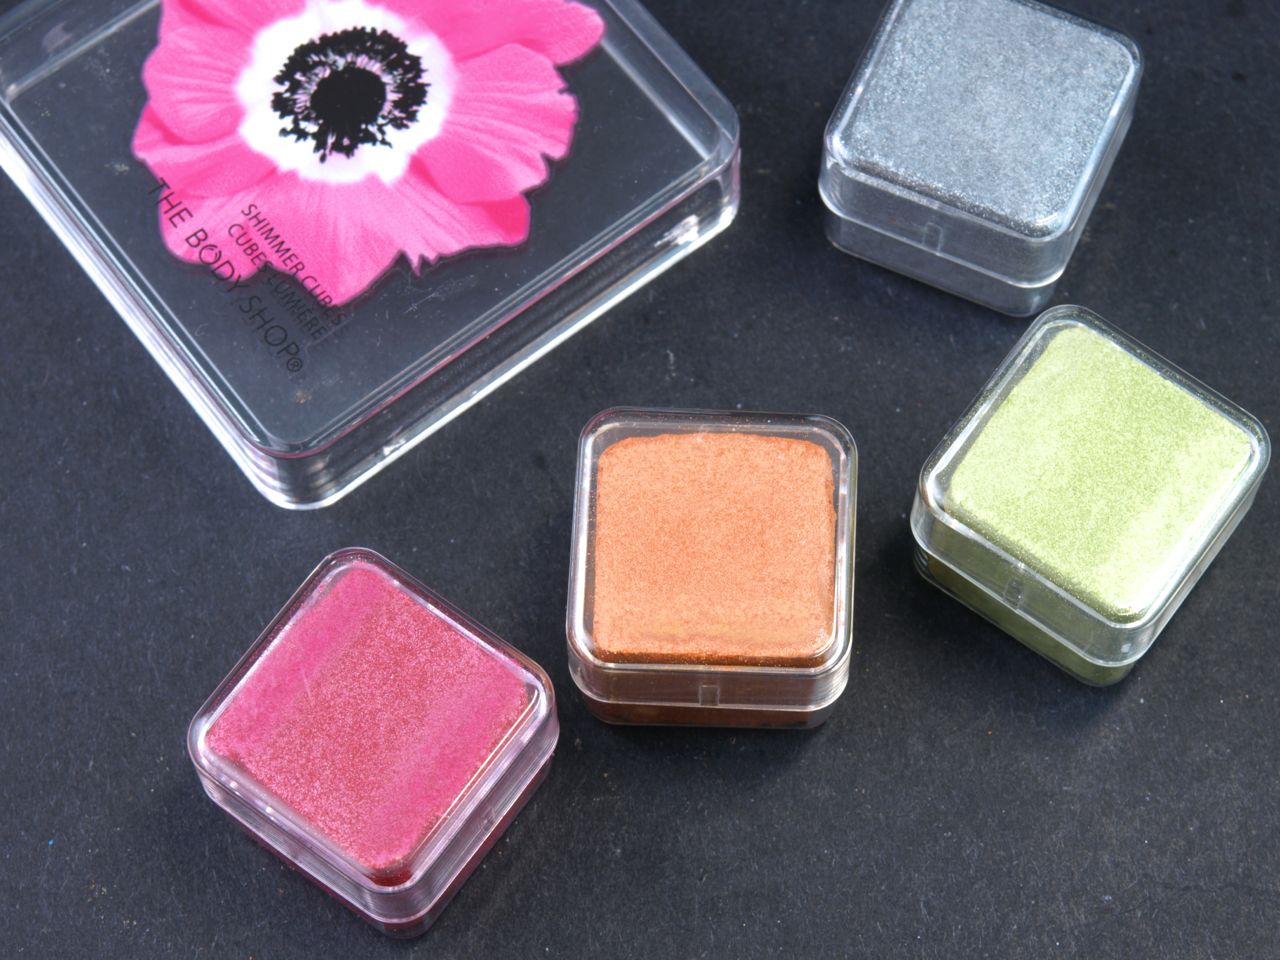 The Body Shop Pink Poppy Shimmer Cubes Palette: Review and Swatches